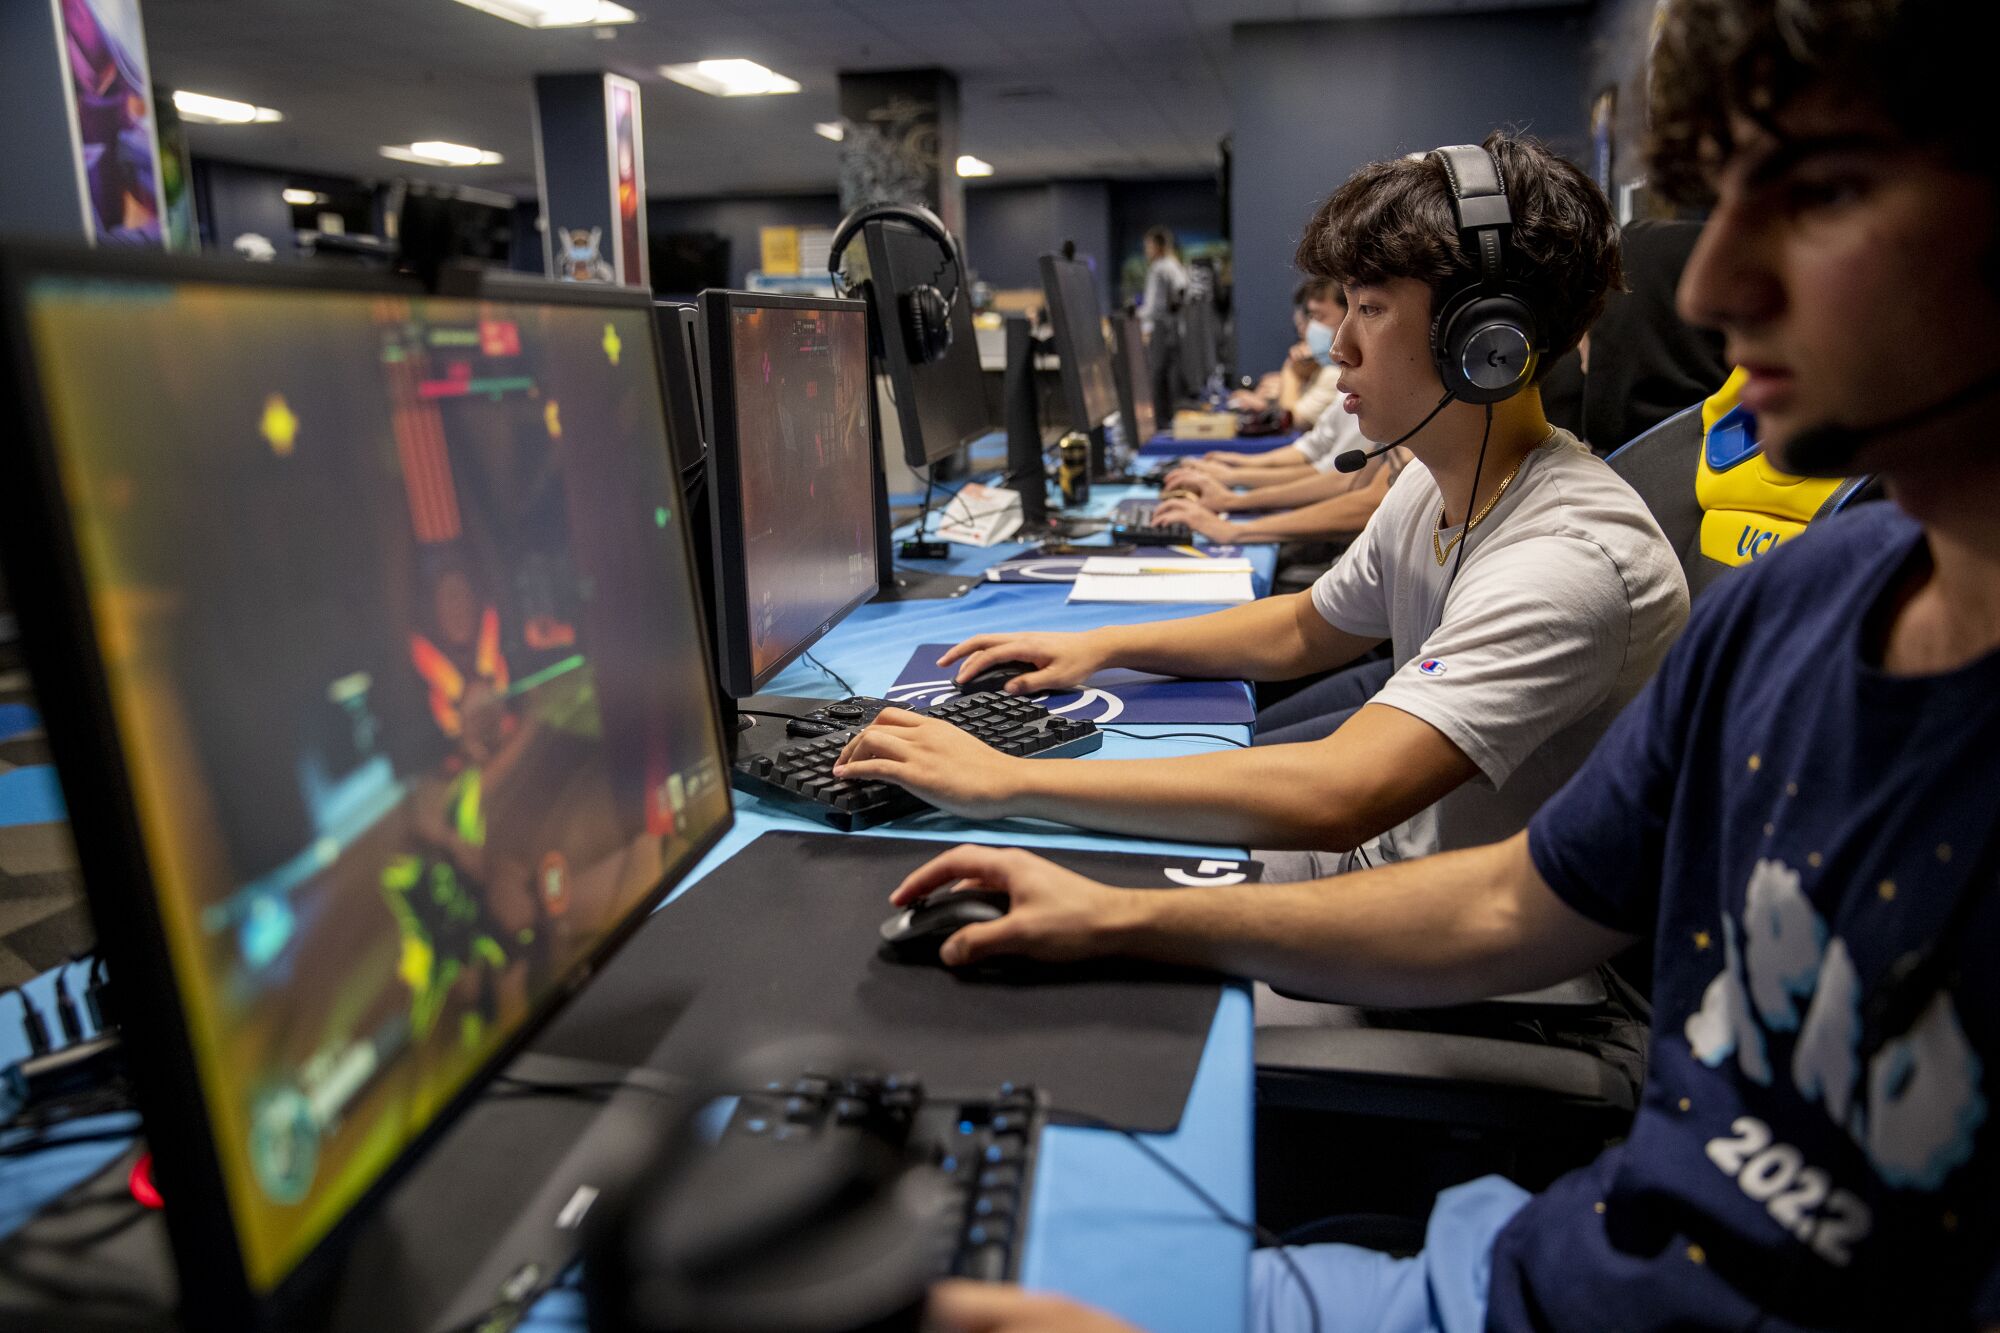 UCI students Jonathan Chao and Cyrus Buffington play Overwatch 2 competition.